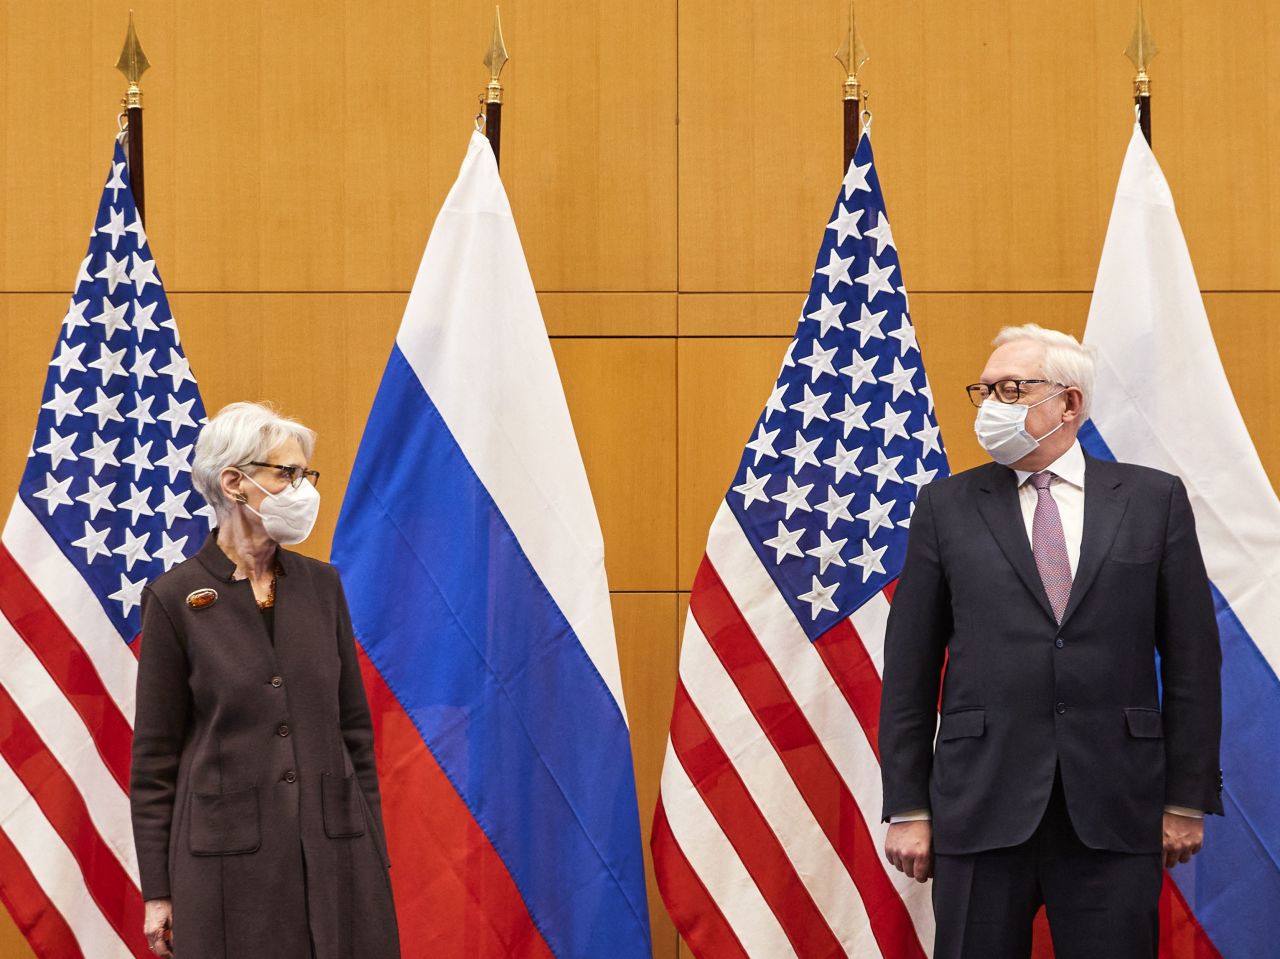 US Deputy Secretary of State Wendy Sherman (L) and Russian deputy Foreign Minister Sergei Ryabkov (R) pose for pictures as they attend security talks on soaring tensions over Ukraine at the US Permanent Mission in Geneva on January 10.